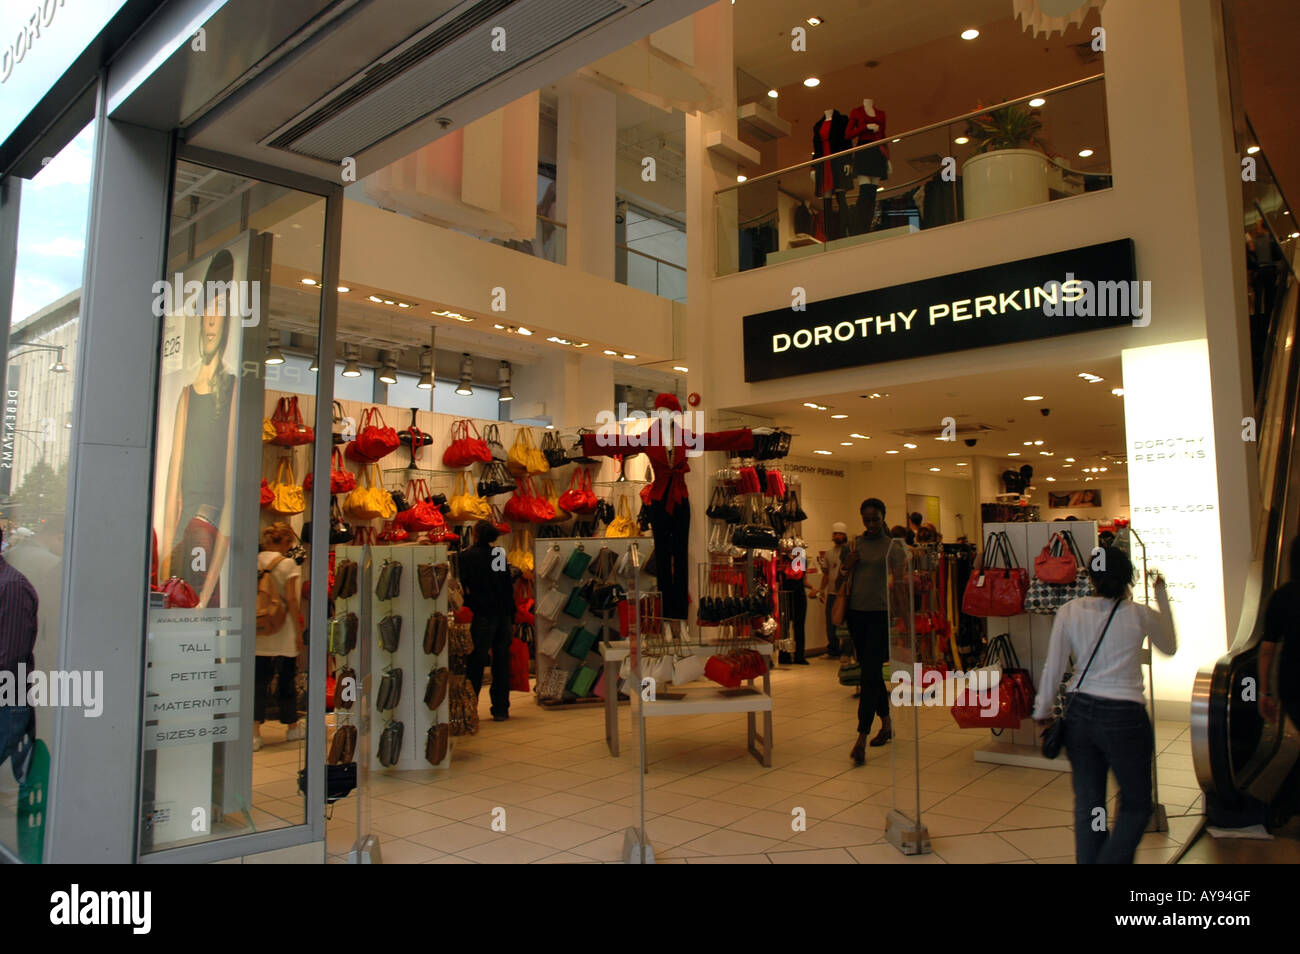 Dorothy perkins shop at Oxford Street in London, UK Stock Photo - Alamy